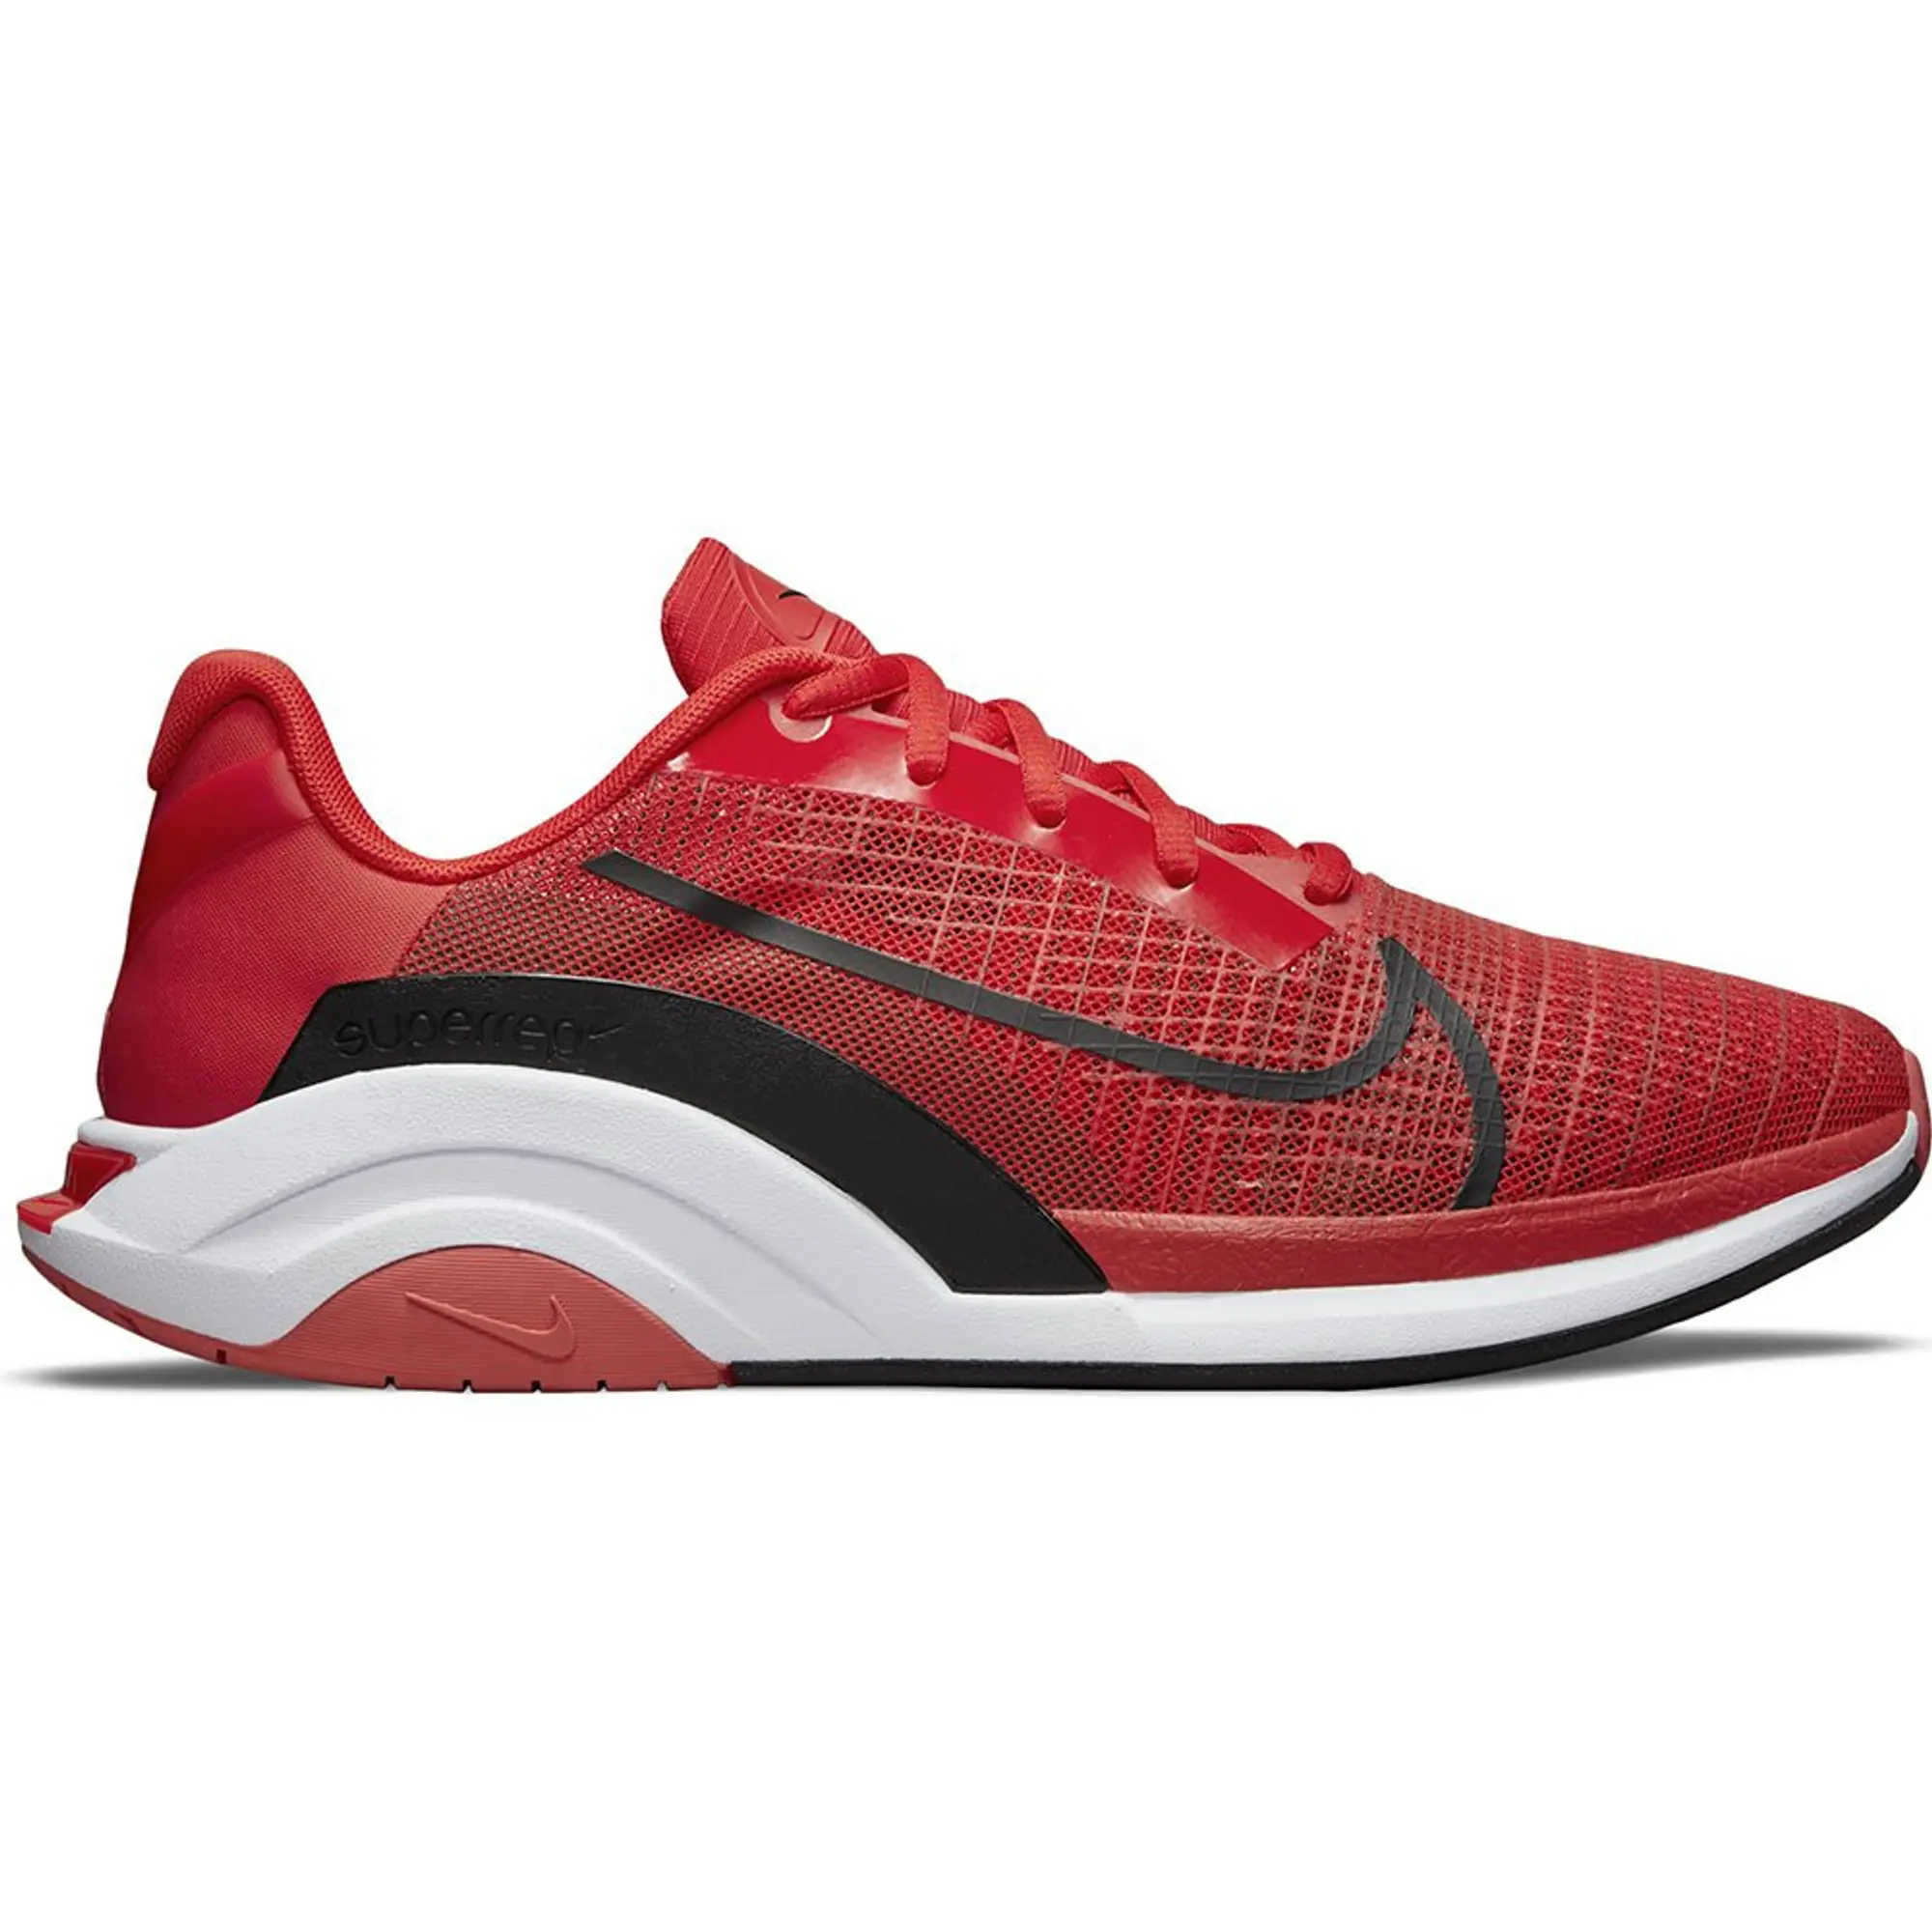 Nike Zoomx Superrep Surge Endurance Shoes  - Red